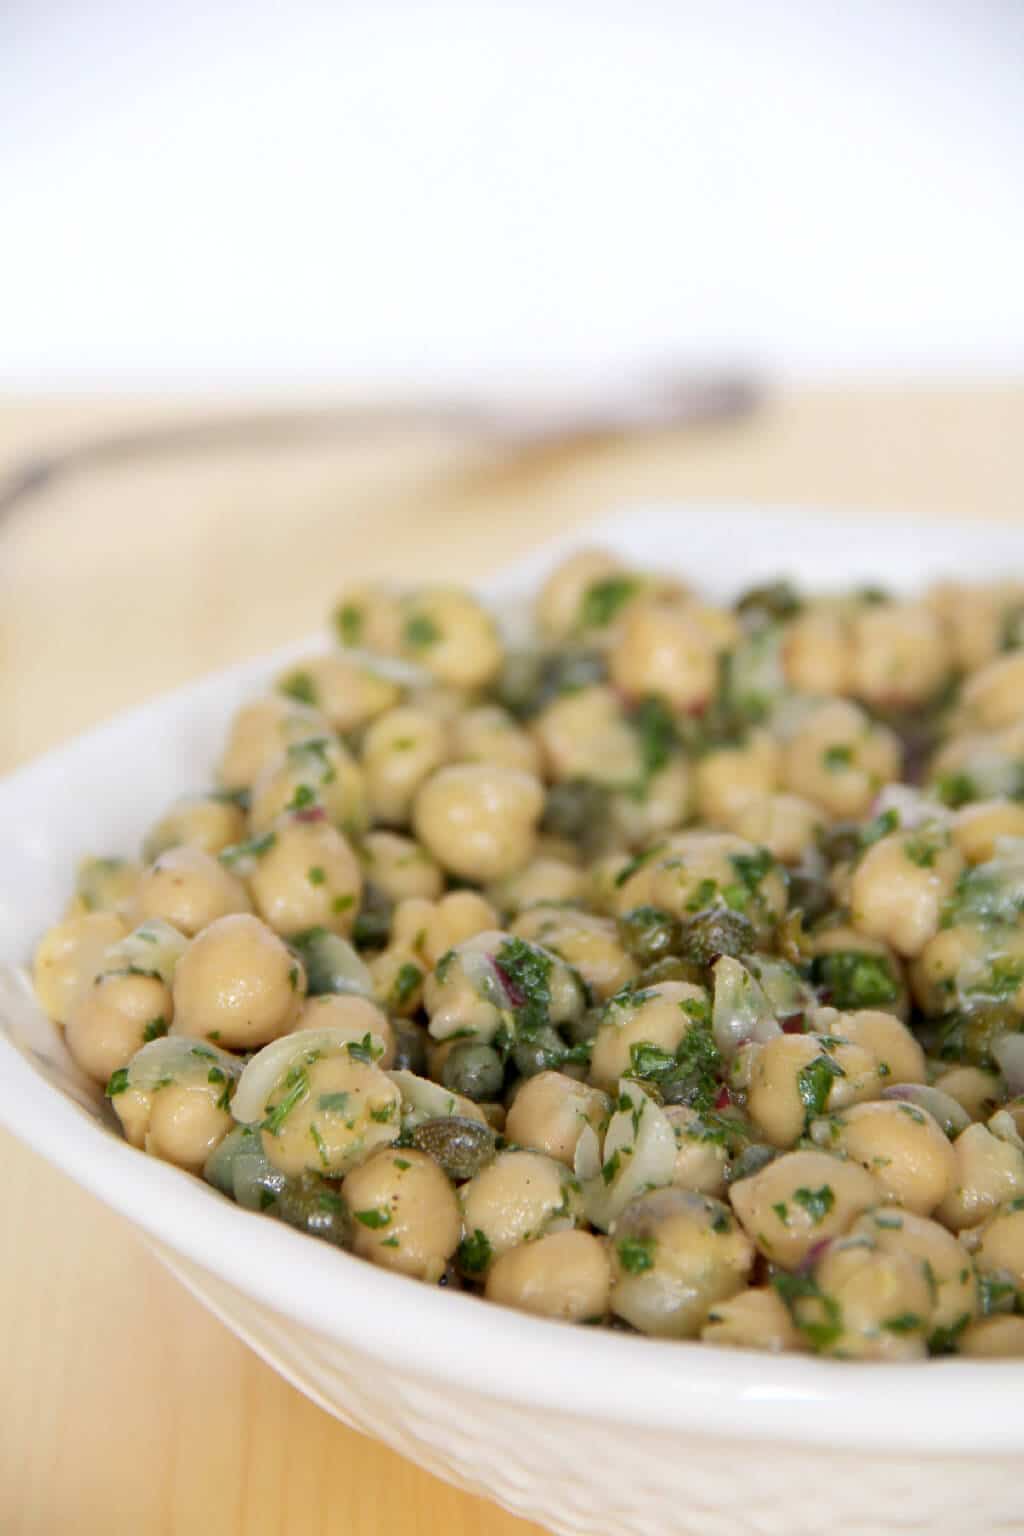 Chickpea salad that's super easy and healthy, with just chickpeas, parsley, onion, and capers, mixed with a lemon vinaigrette.